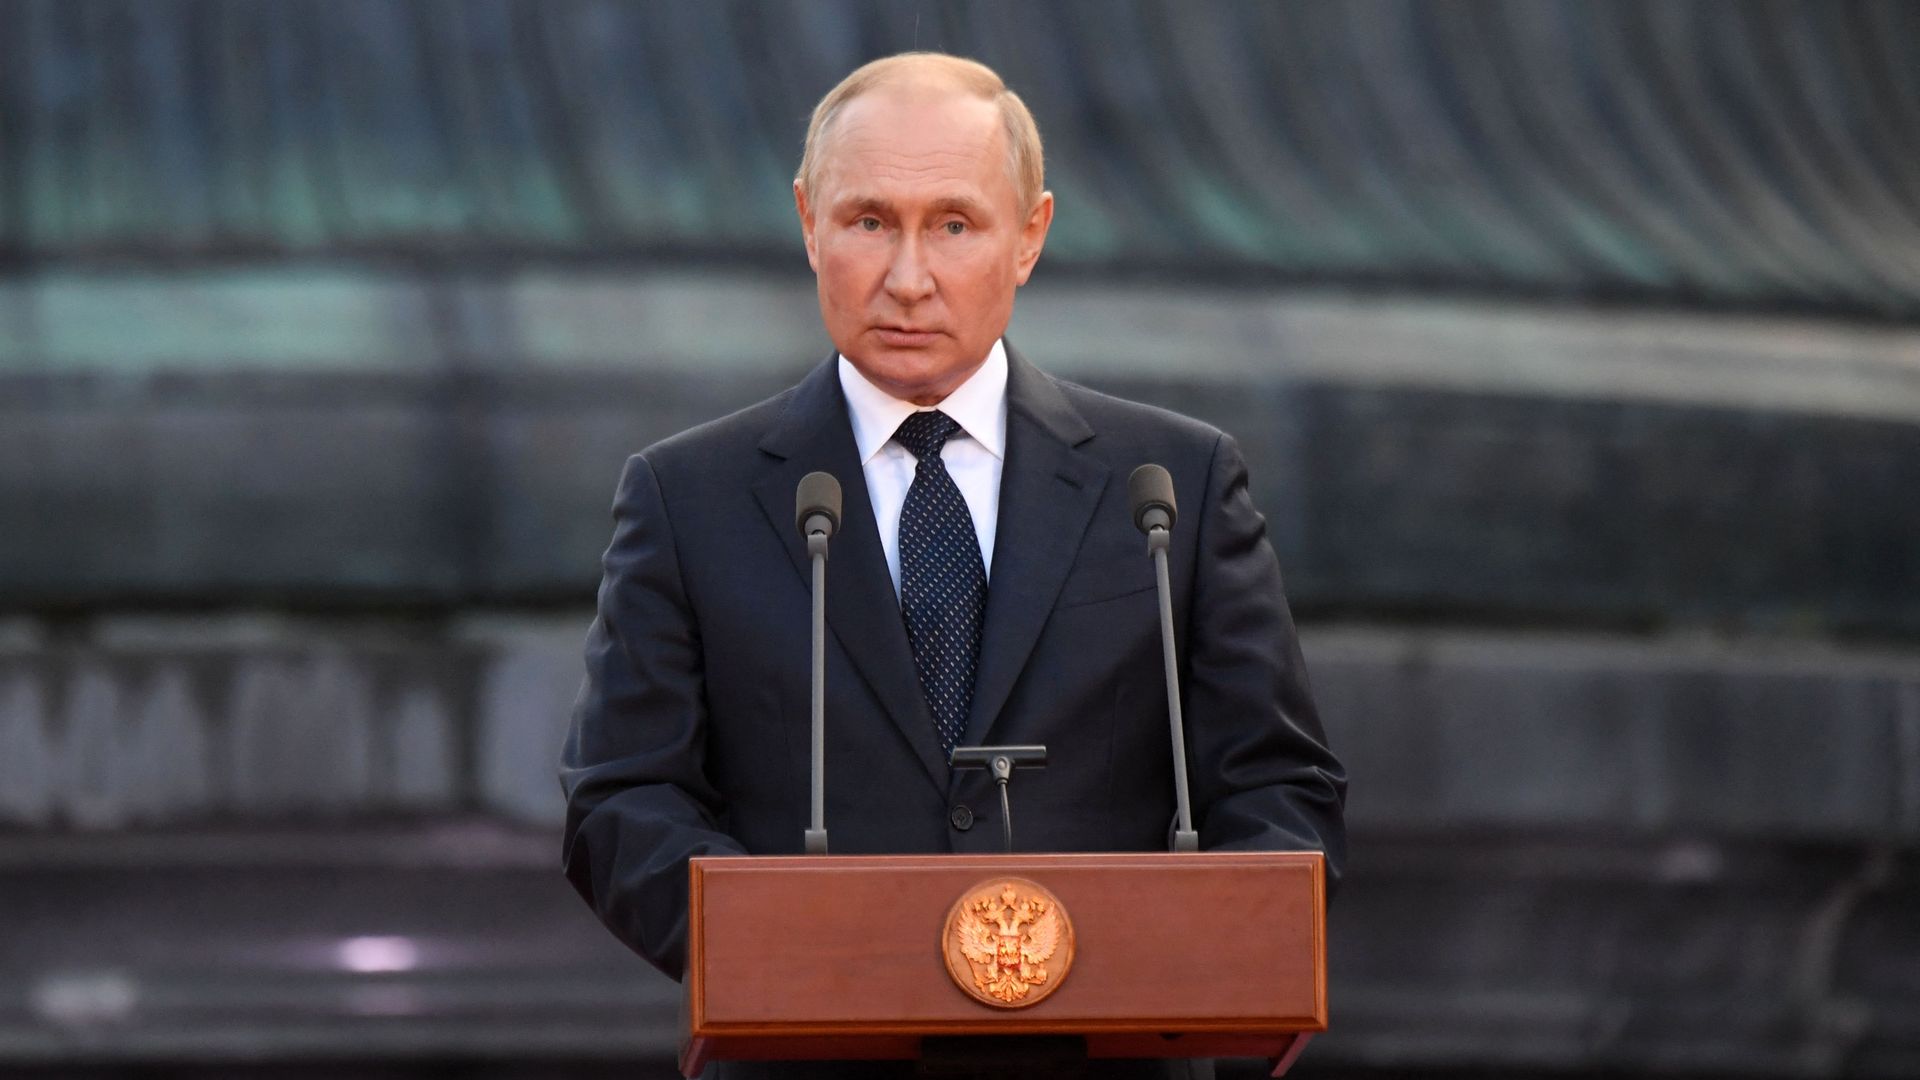 Russian President Vladimir Putin gives a speech during an event to mark the 1160th anniversary of Russia's statehood in Veliky Novgorod on September 21, 2022